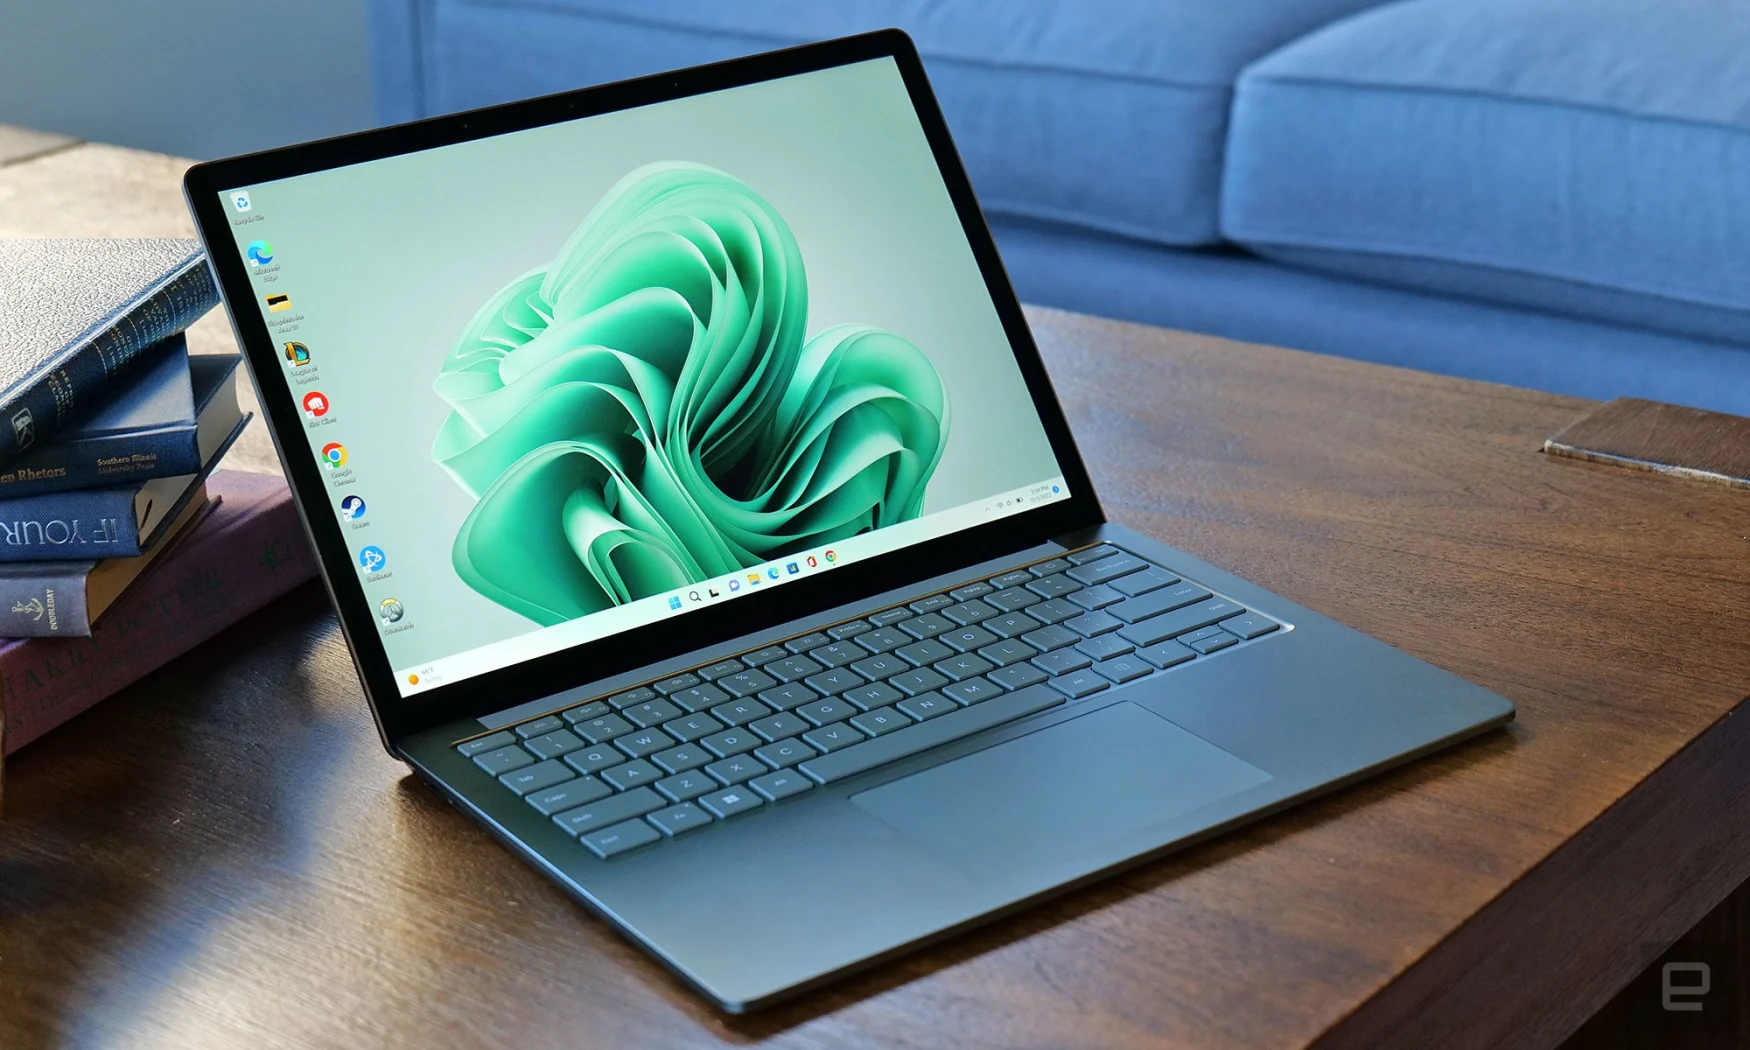 While the Surface Laptop 5 hasn't received many updates on the outside aside from a fresh sage green color option, support for faster 12th Gen Intel CPUs and a new Thunderbolt 4 port give it a big boost in speed and versatility.